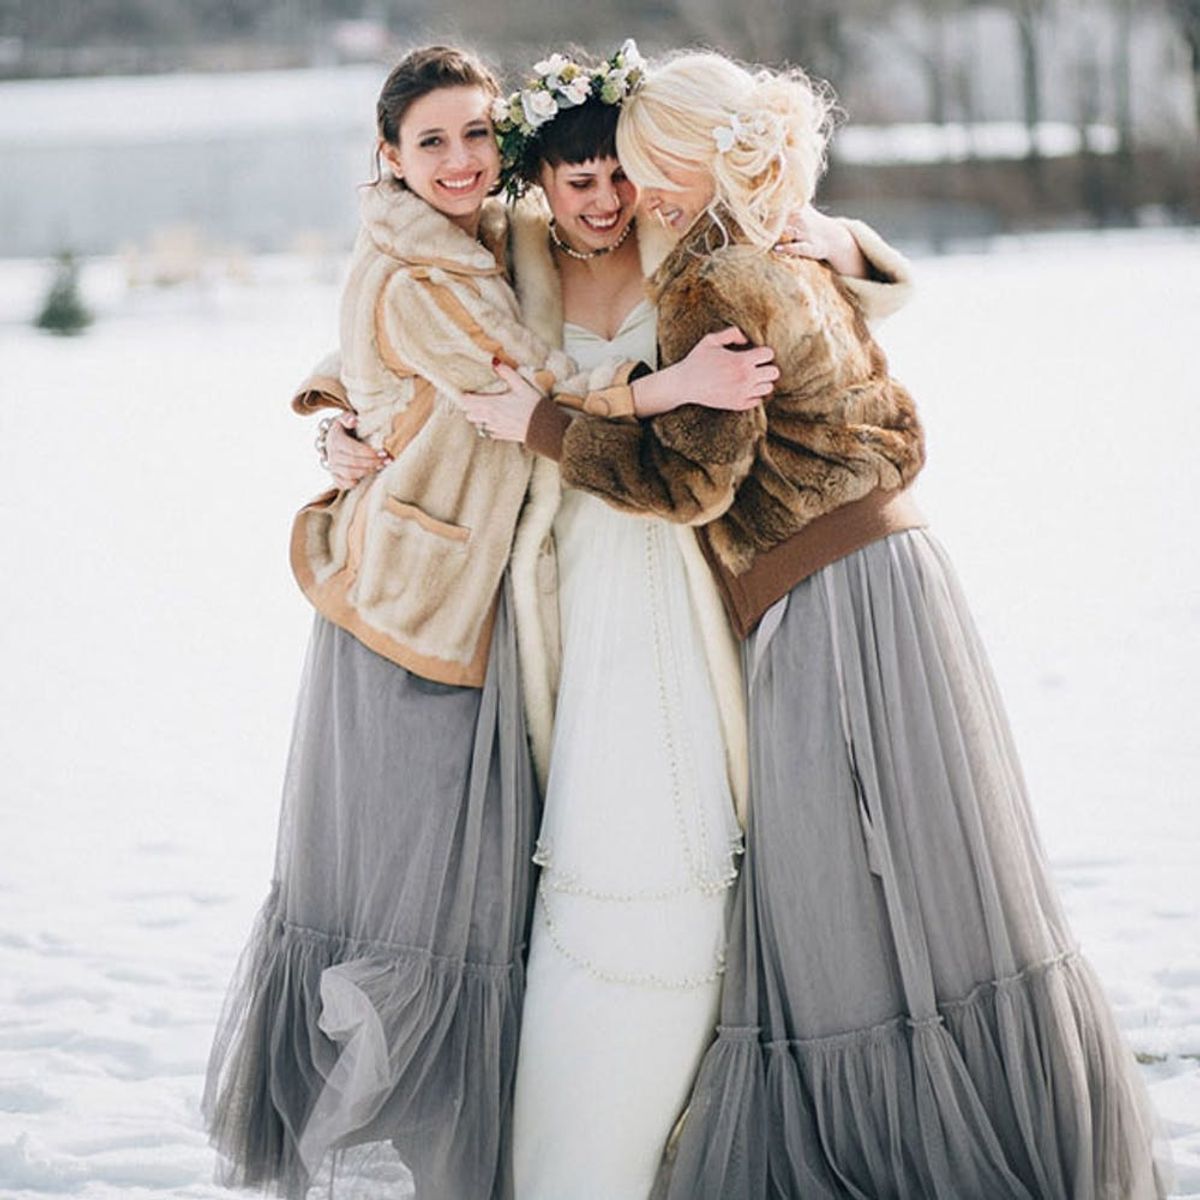 10 Bridesmaid Styles Perfect for a Winter Wedding